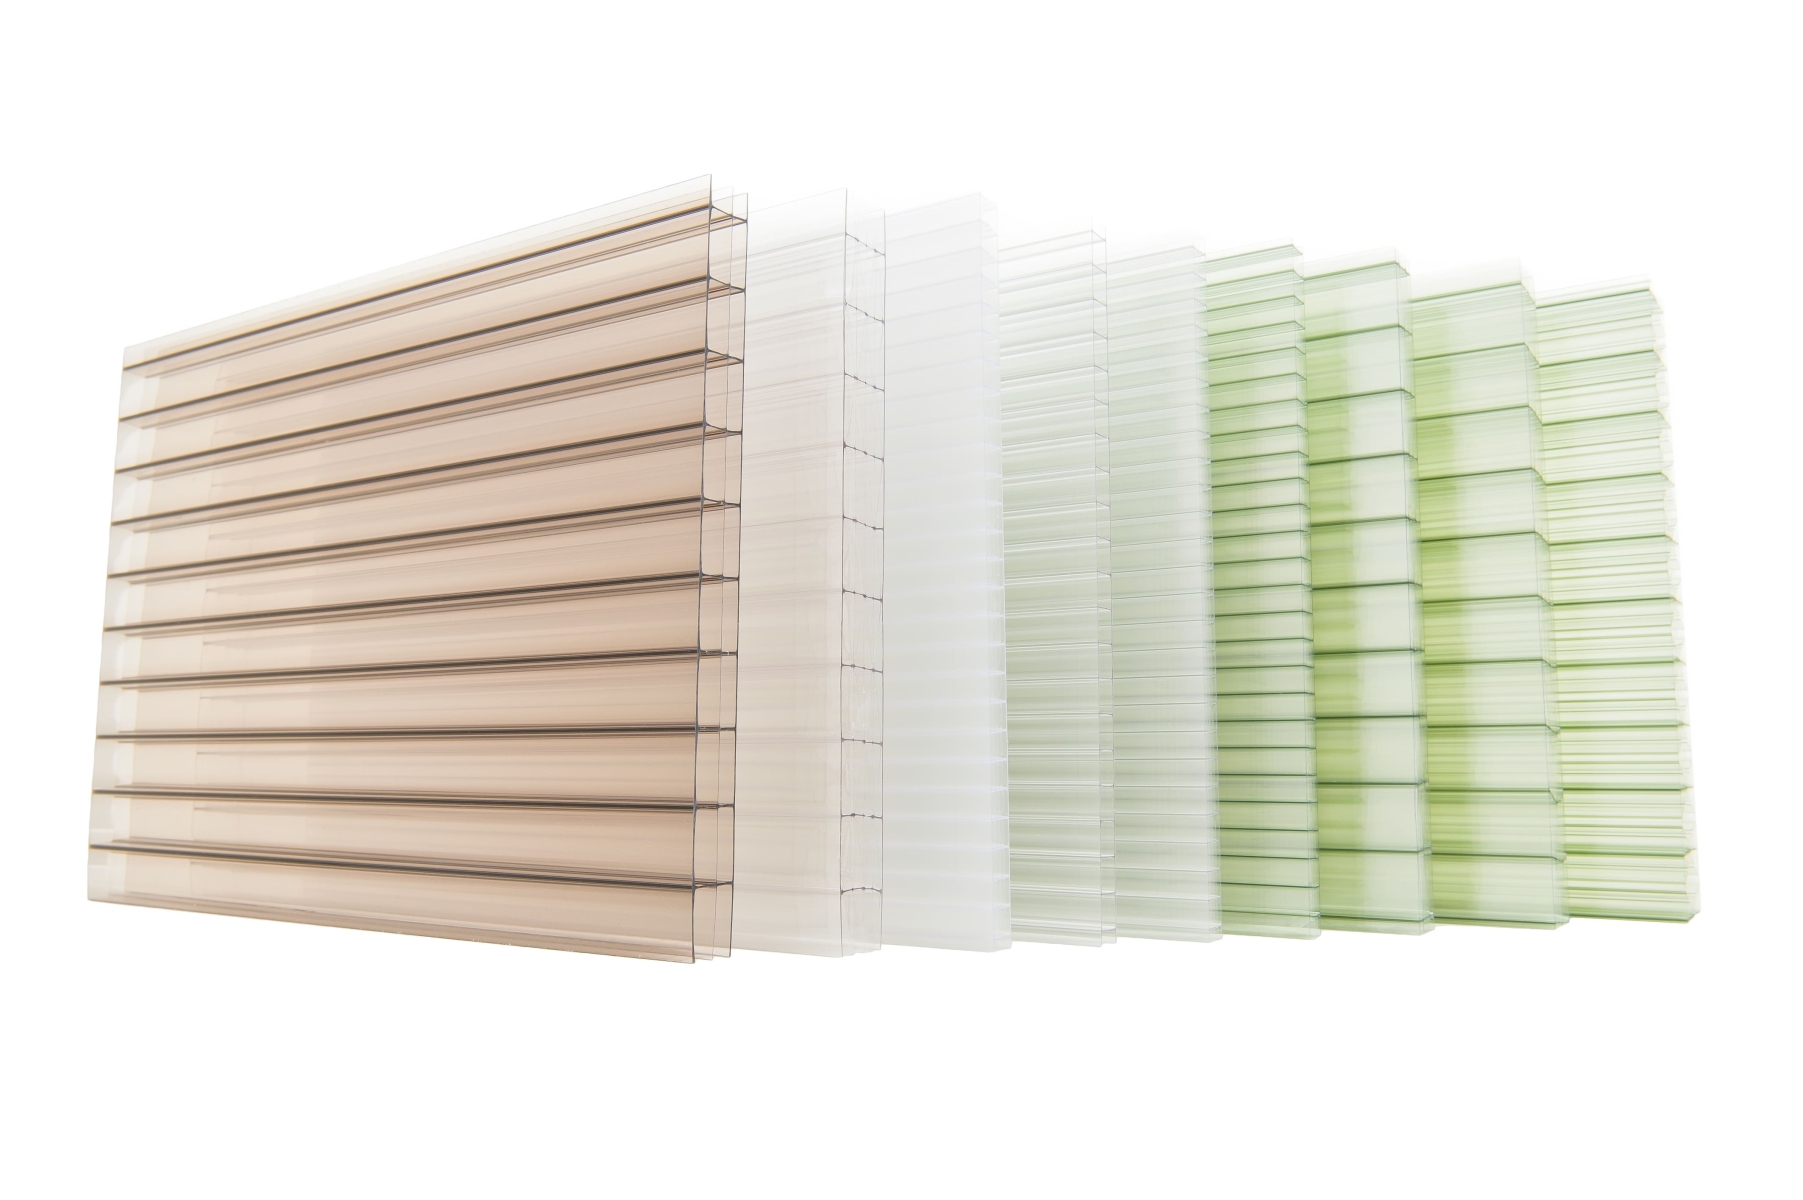 Polycarbonate Sheet Applications